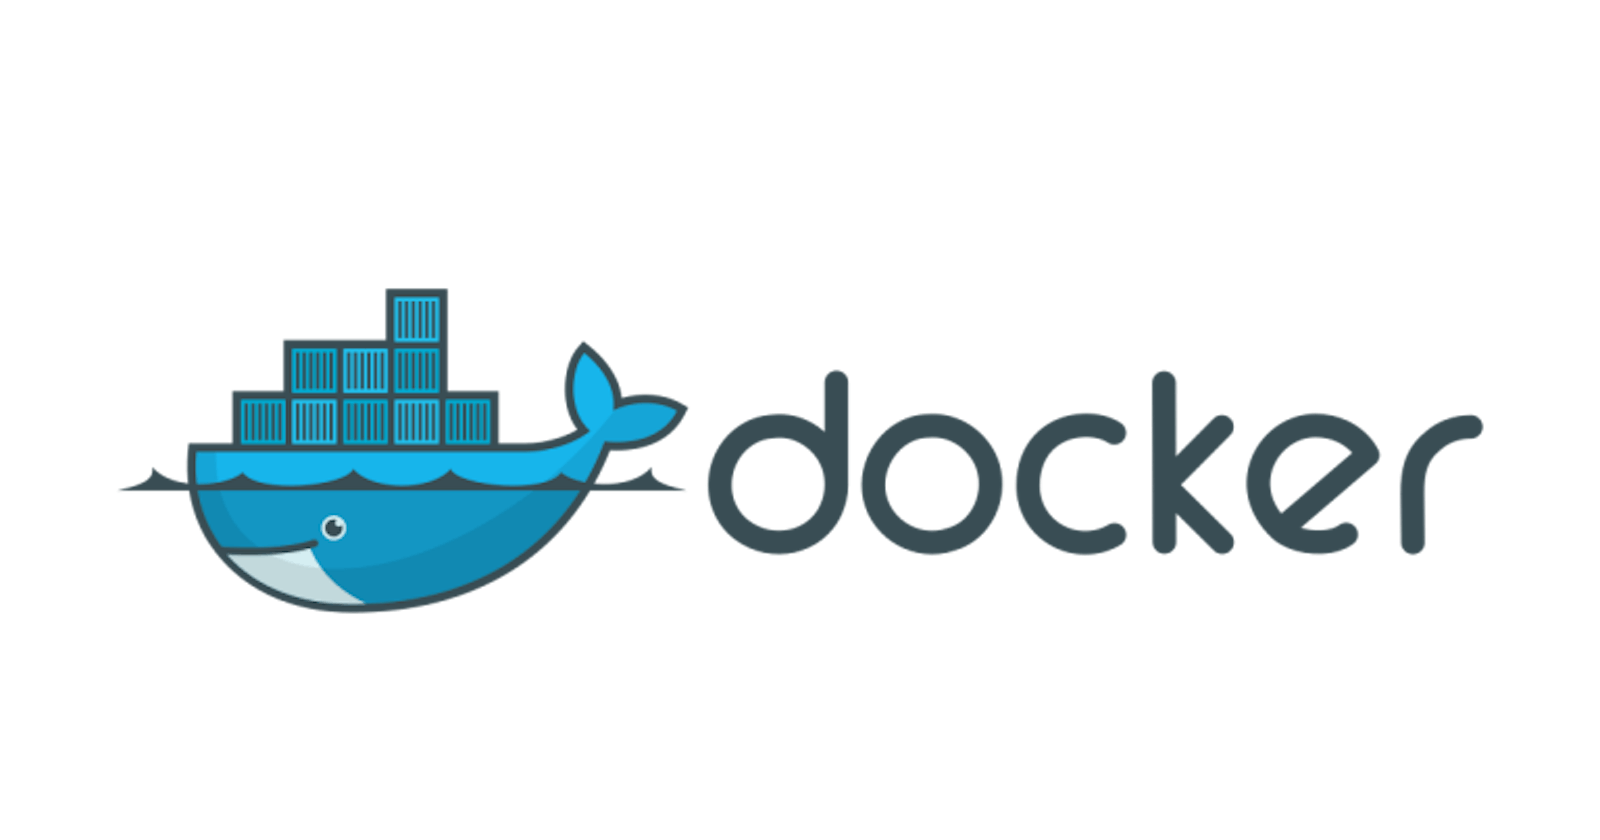 Creating  a "To do" Application Docker file